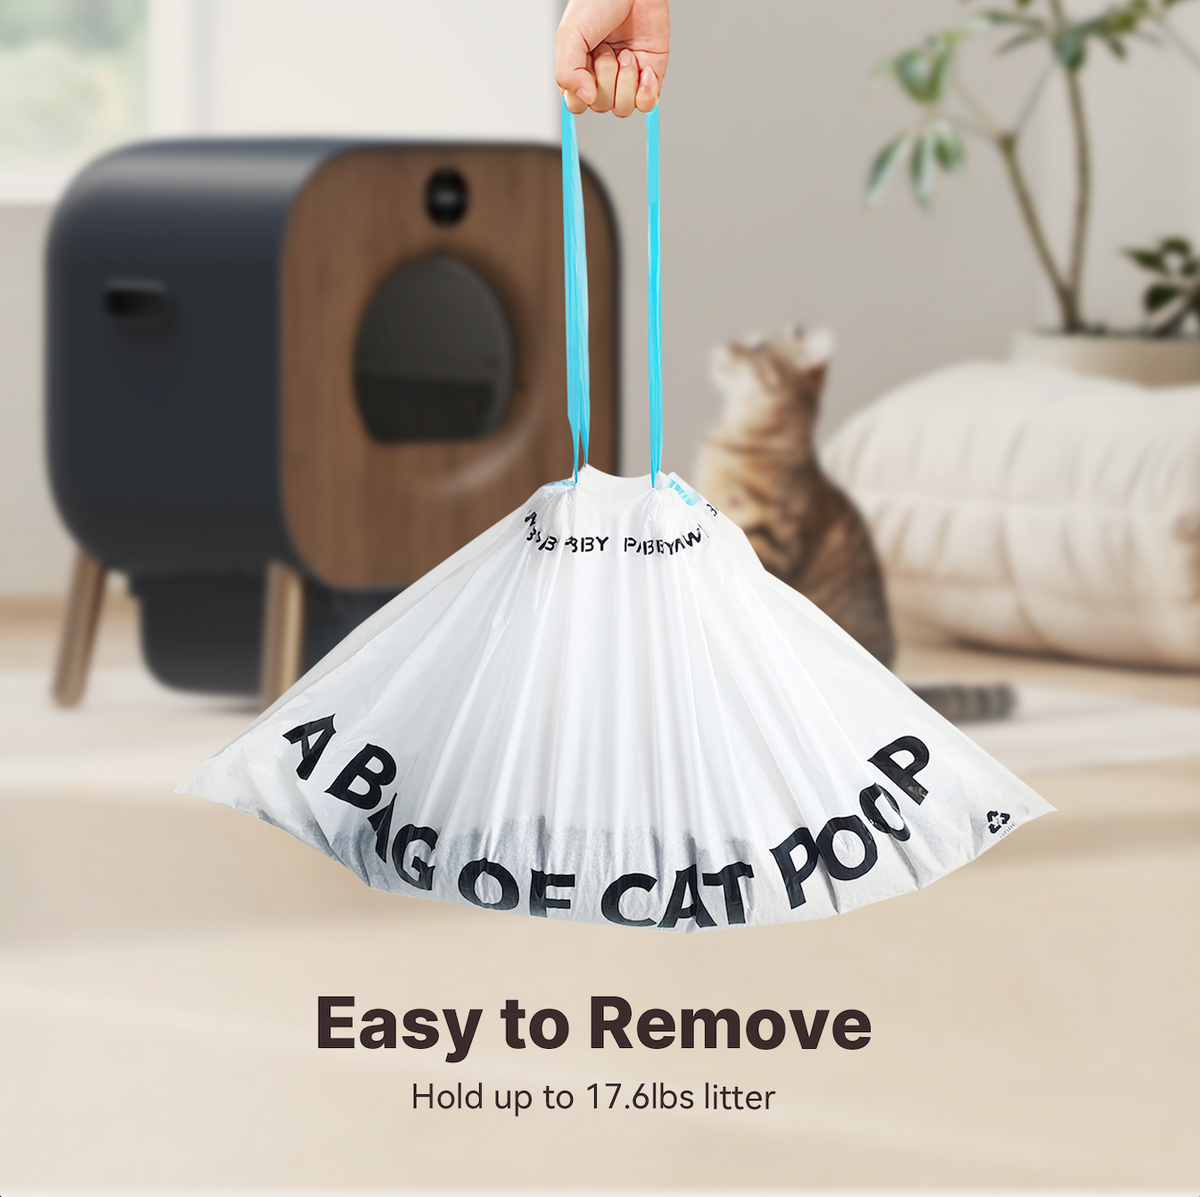 Replaced Waste Bags